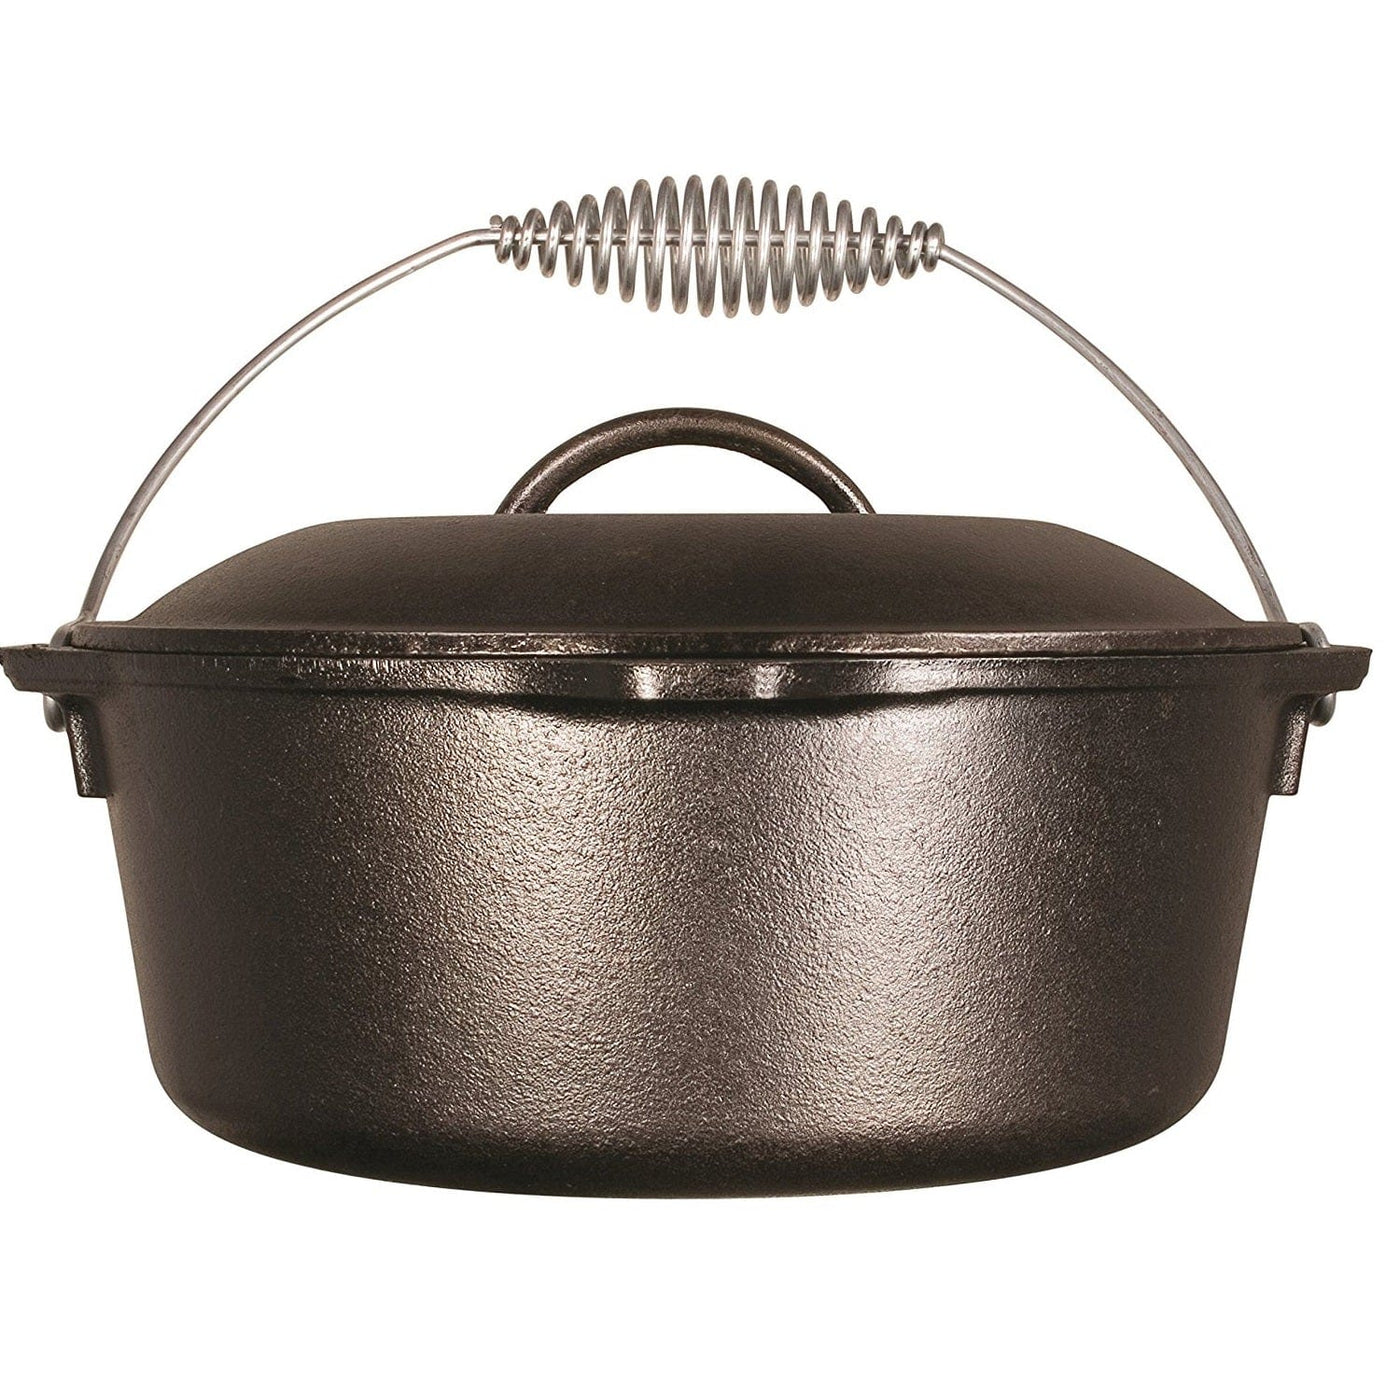 Lodge Cast Iron Lodge 10in Cast Iron Dutch Oven Pre-Seasoned 5-Quart Camping And Outdoor